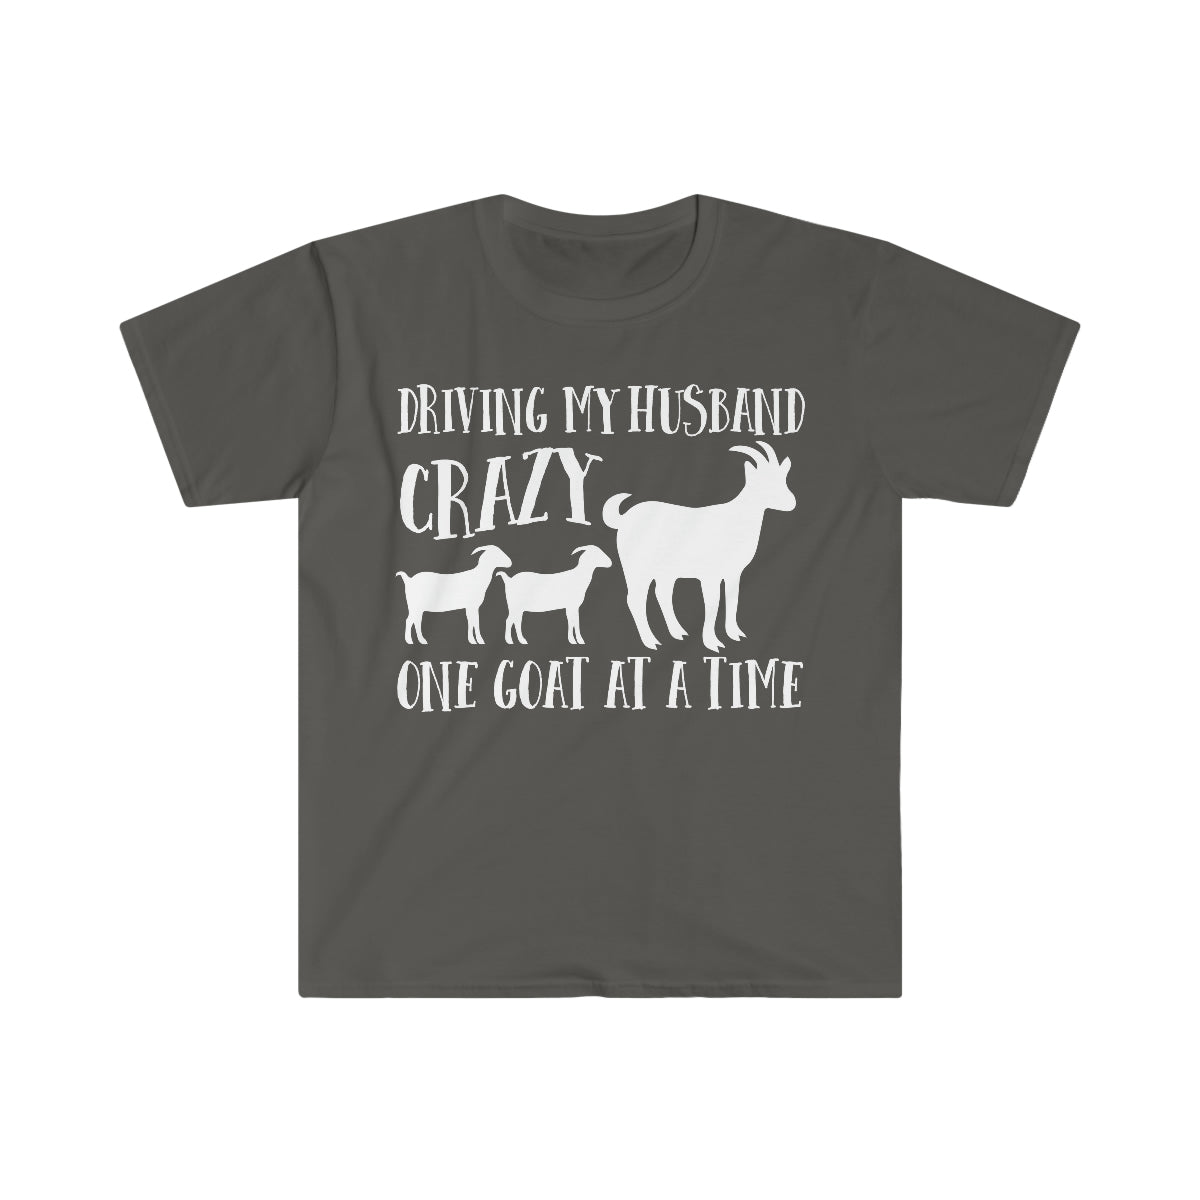 Driving My Husband Crazy One Goat at a Time* Unisex Softstyle T-Shirt